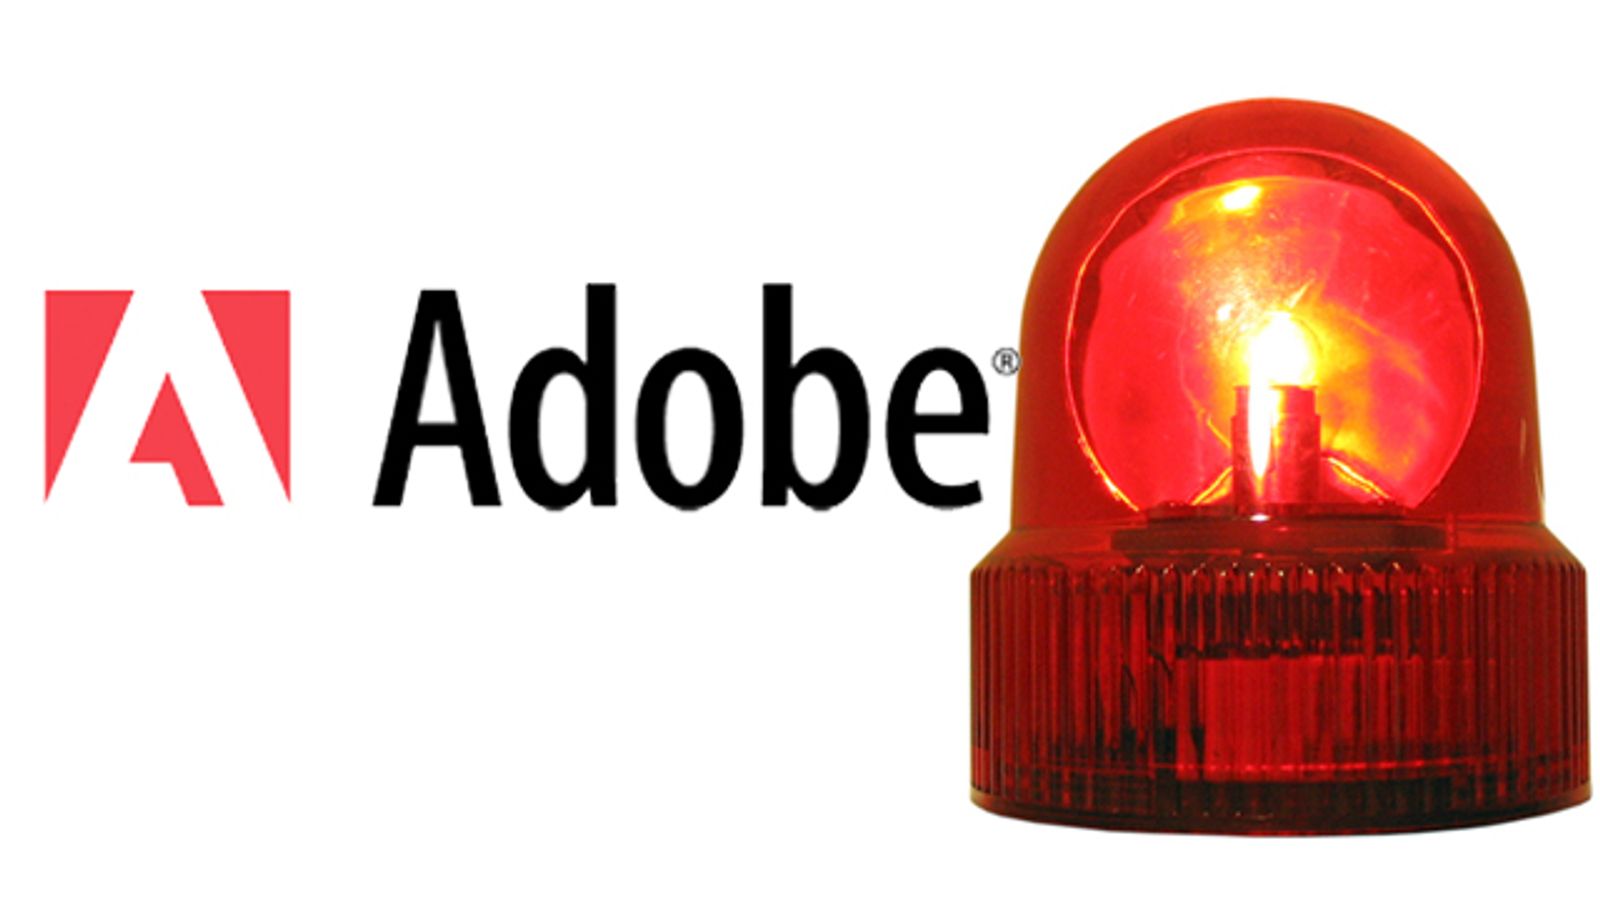 Adobe Users May Be at Risk Without Updates